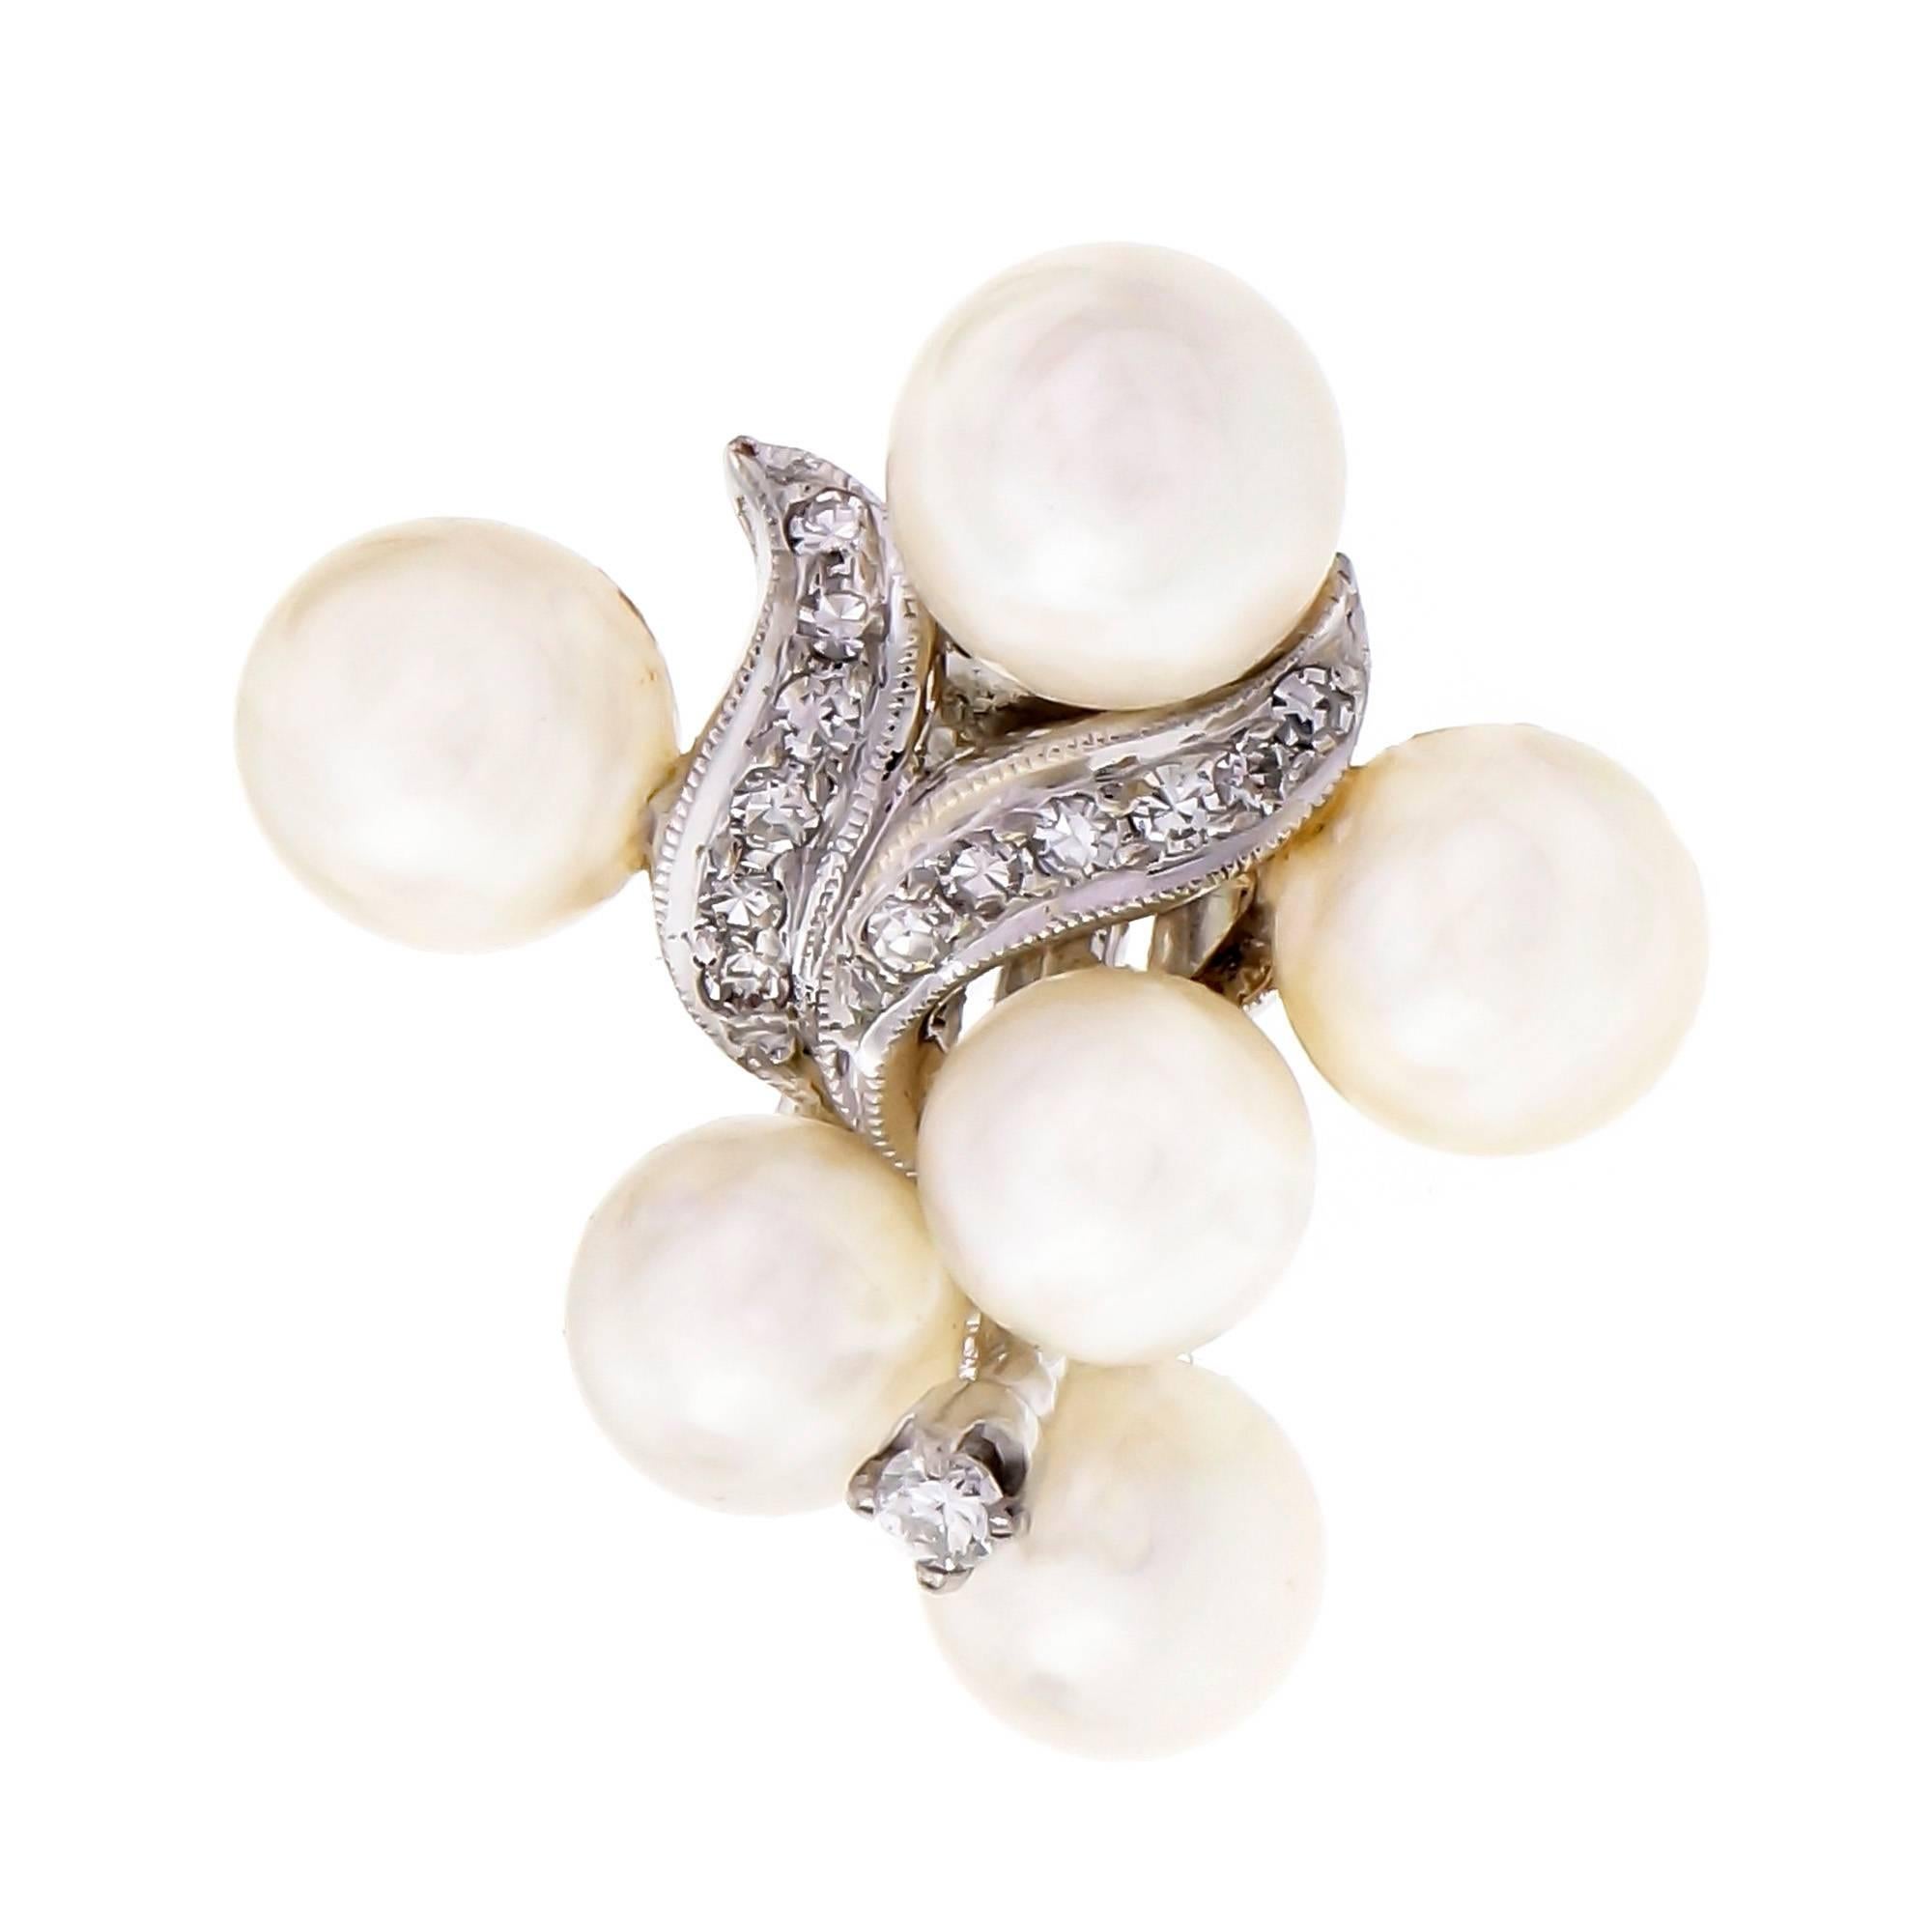 Mid-century vintage 1950s clip post cultured Pearl and Diamond 14k white gold earrings.

12 round white cultured Pearls with good lustré and few blemishes, 6 – 7mm 
22 round single cut Diamonds, approx. total weight .22cts, G, VS
2 round full cut